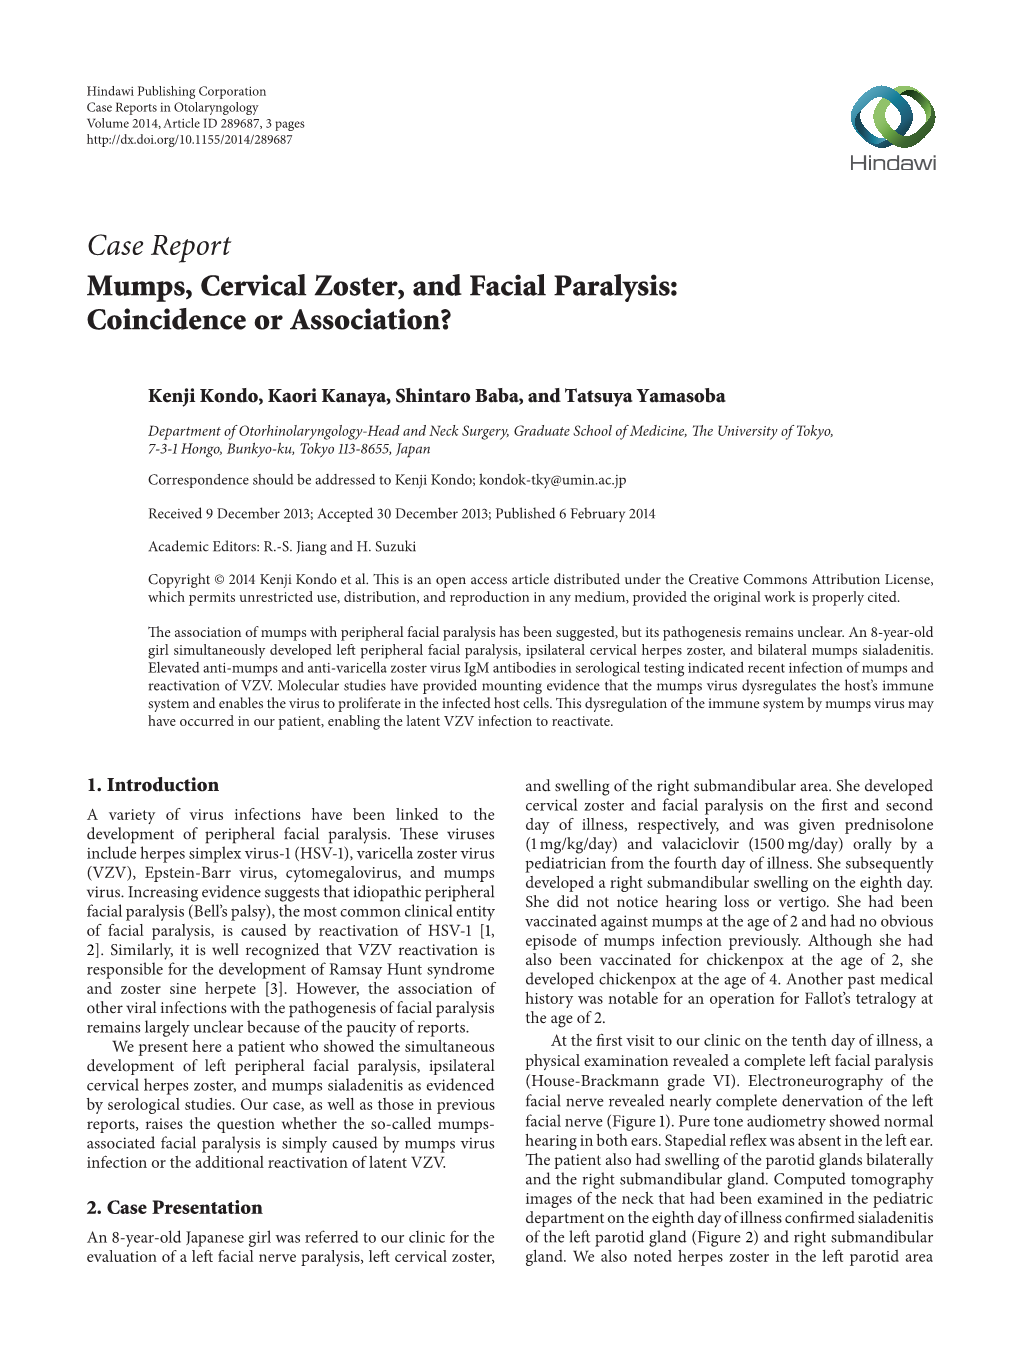 Case Report Mumps, Cervical Zoster, and Facial Paralysis: Coincidence Or Association?